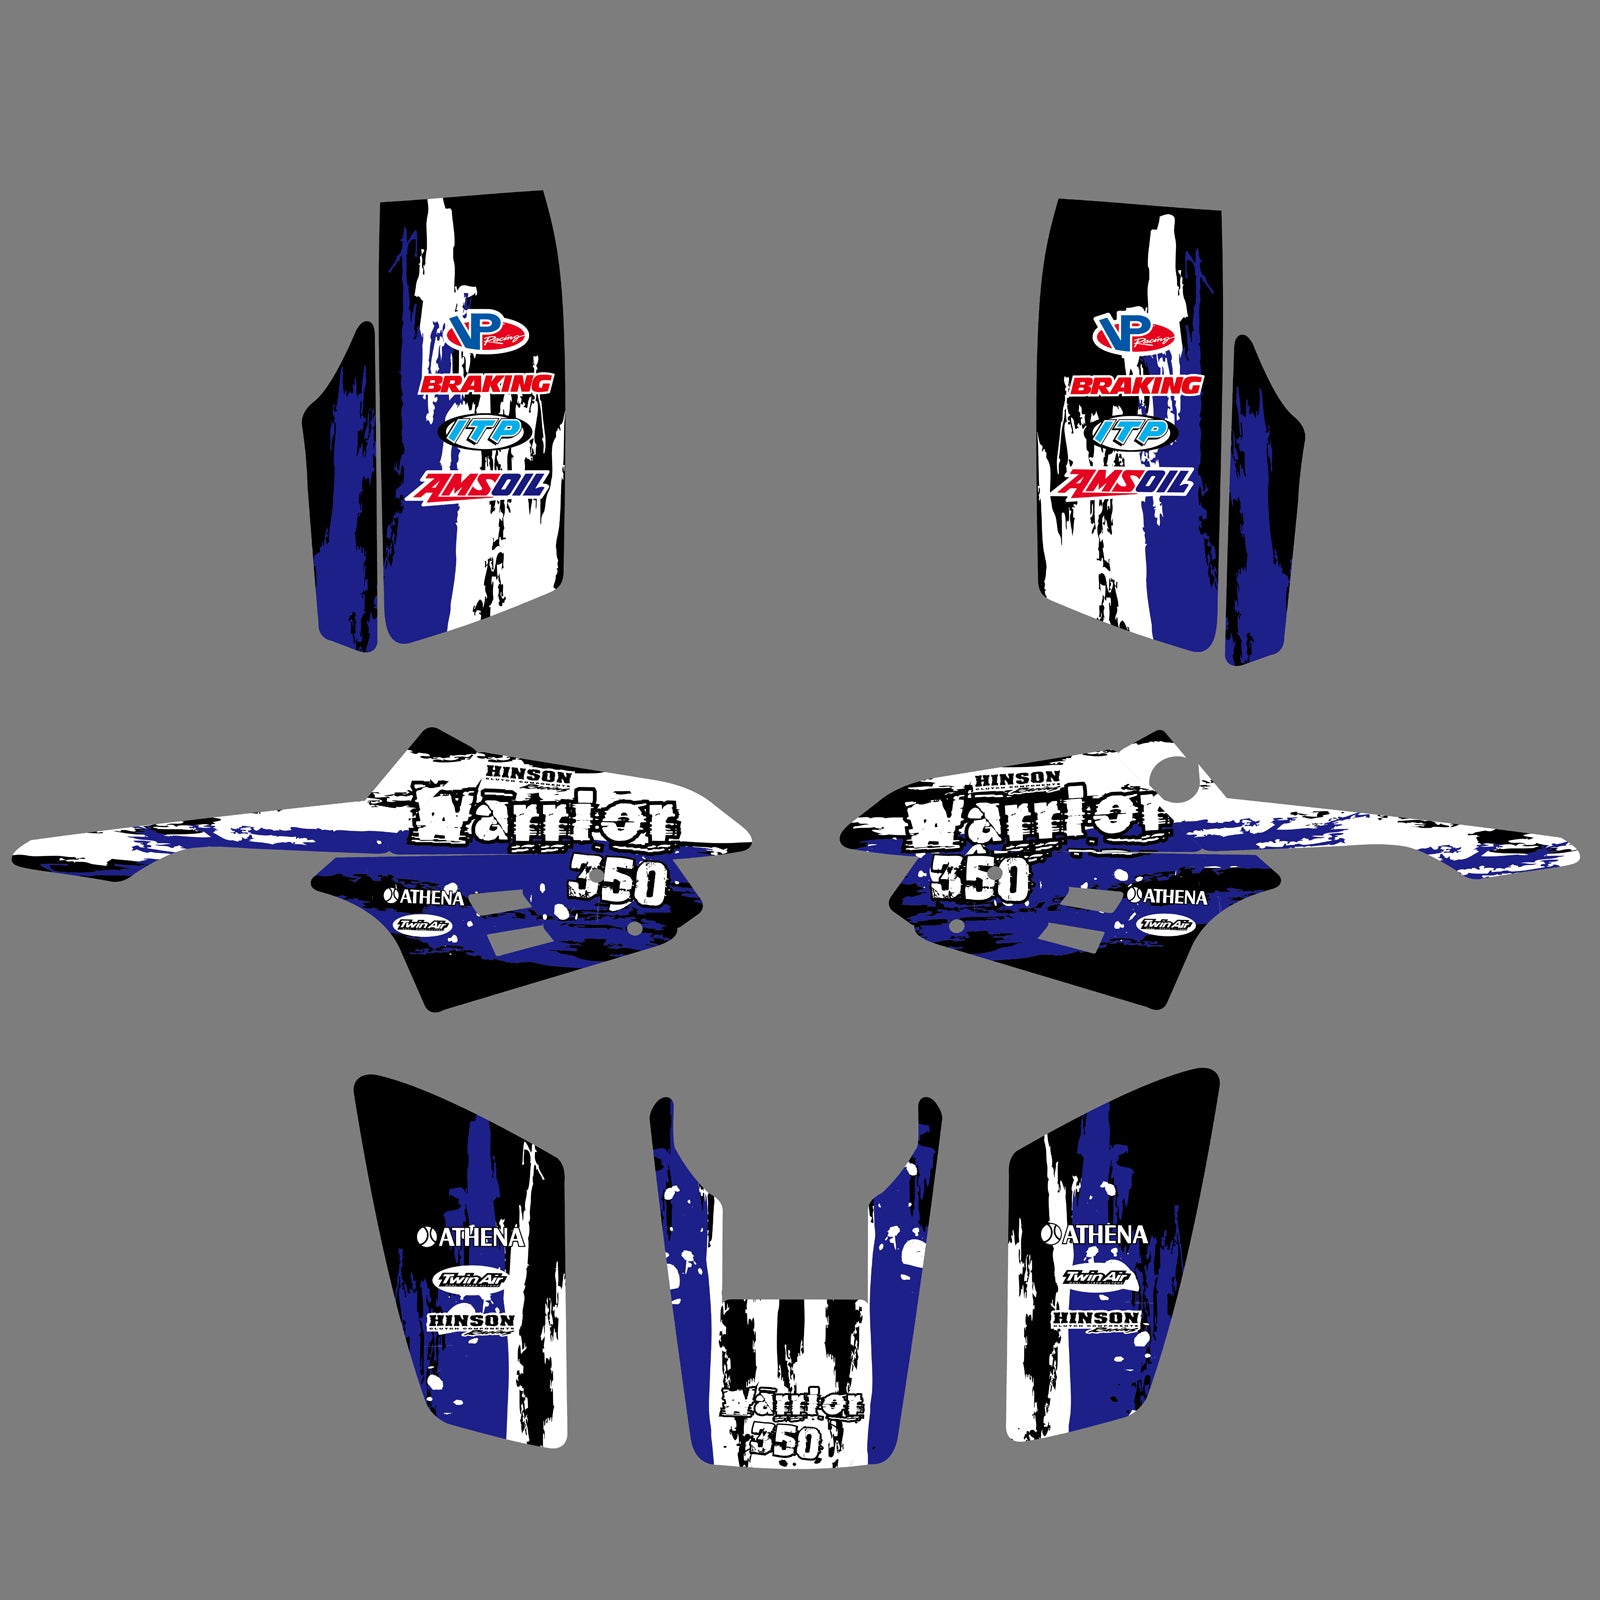 ATV Graphic Decals Protector Sticker for Yamaha Warrior 350 1987-2004